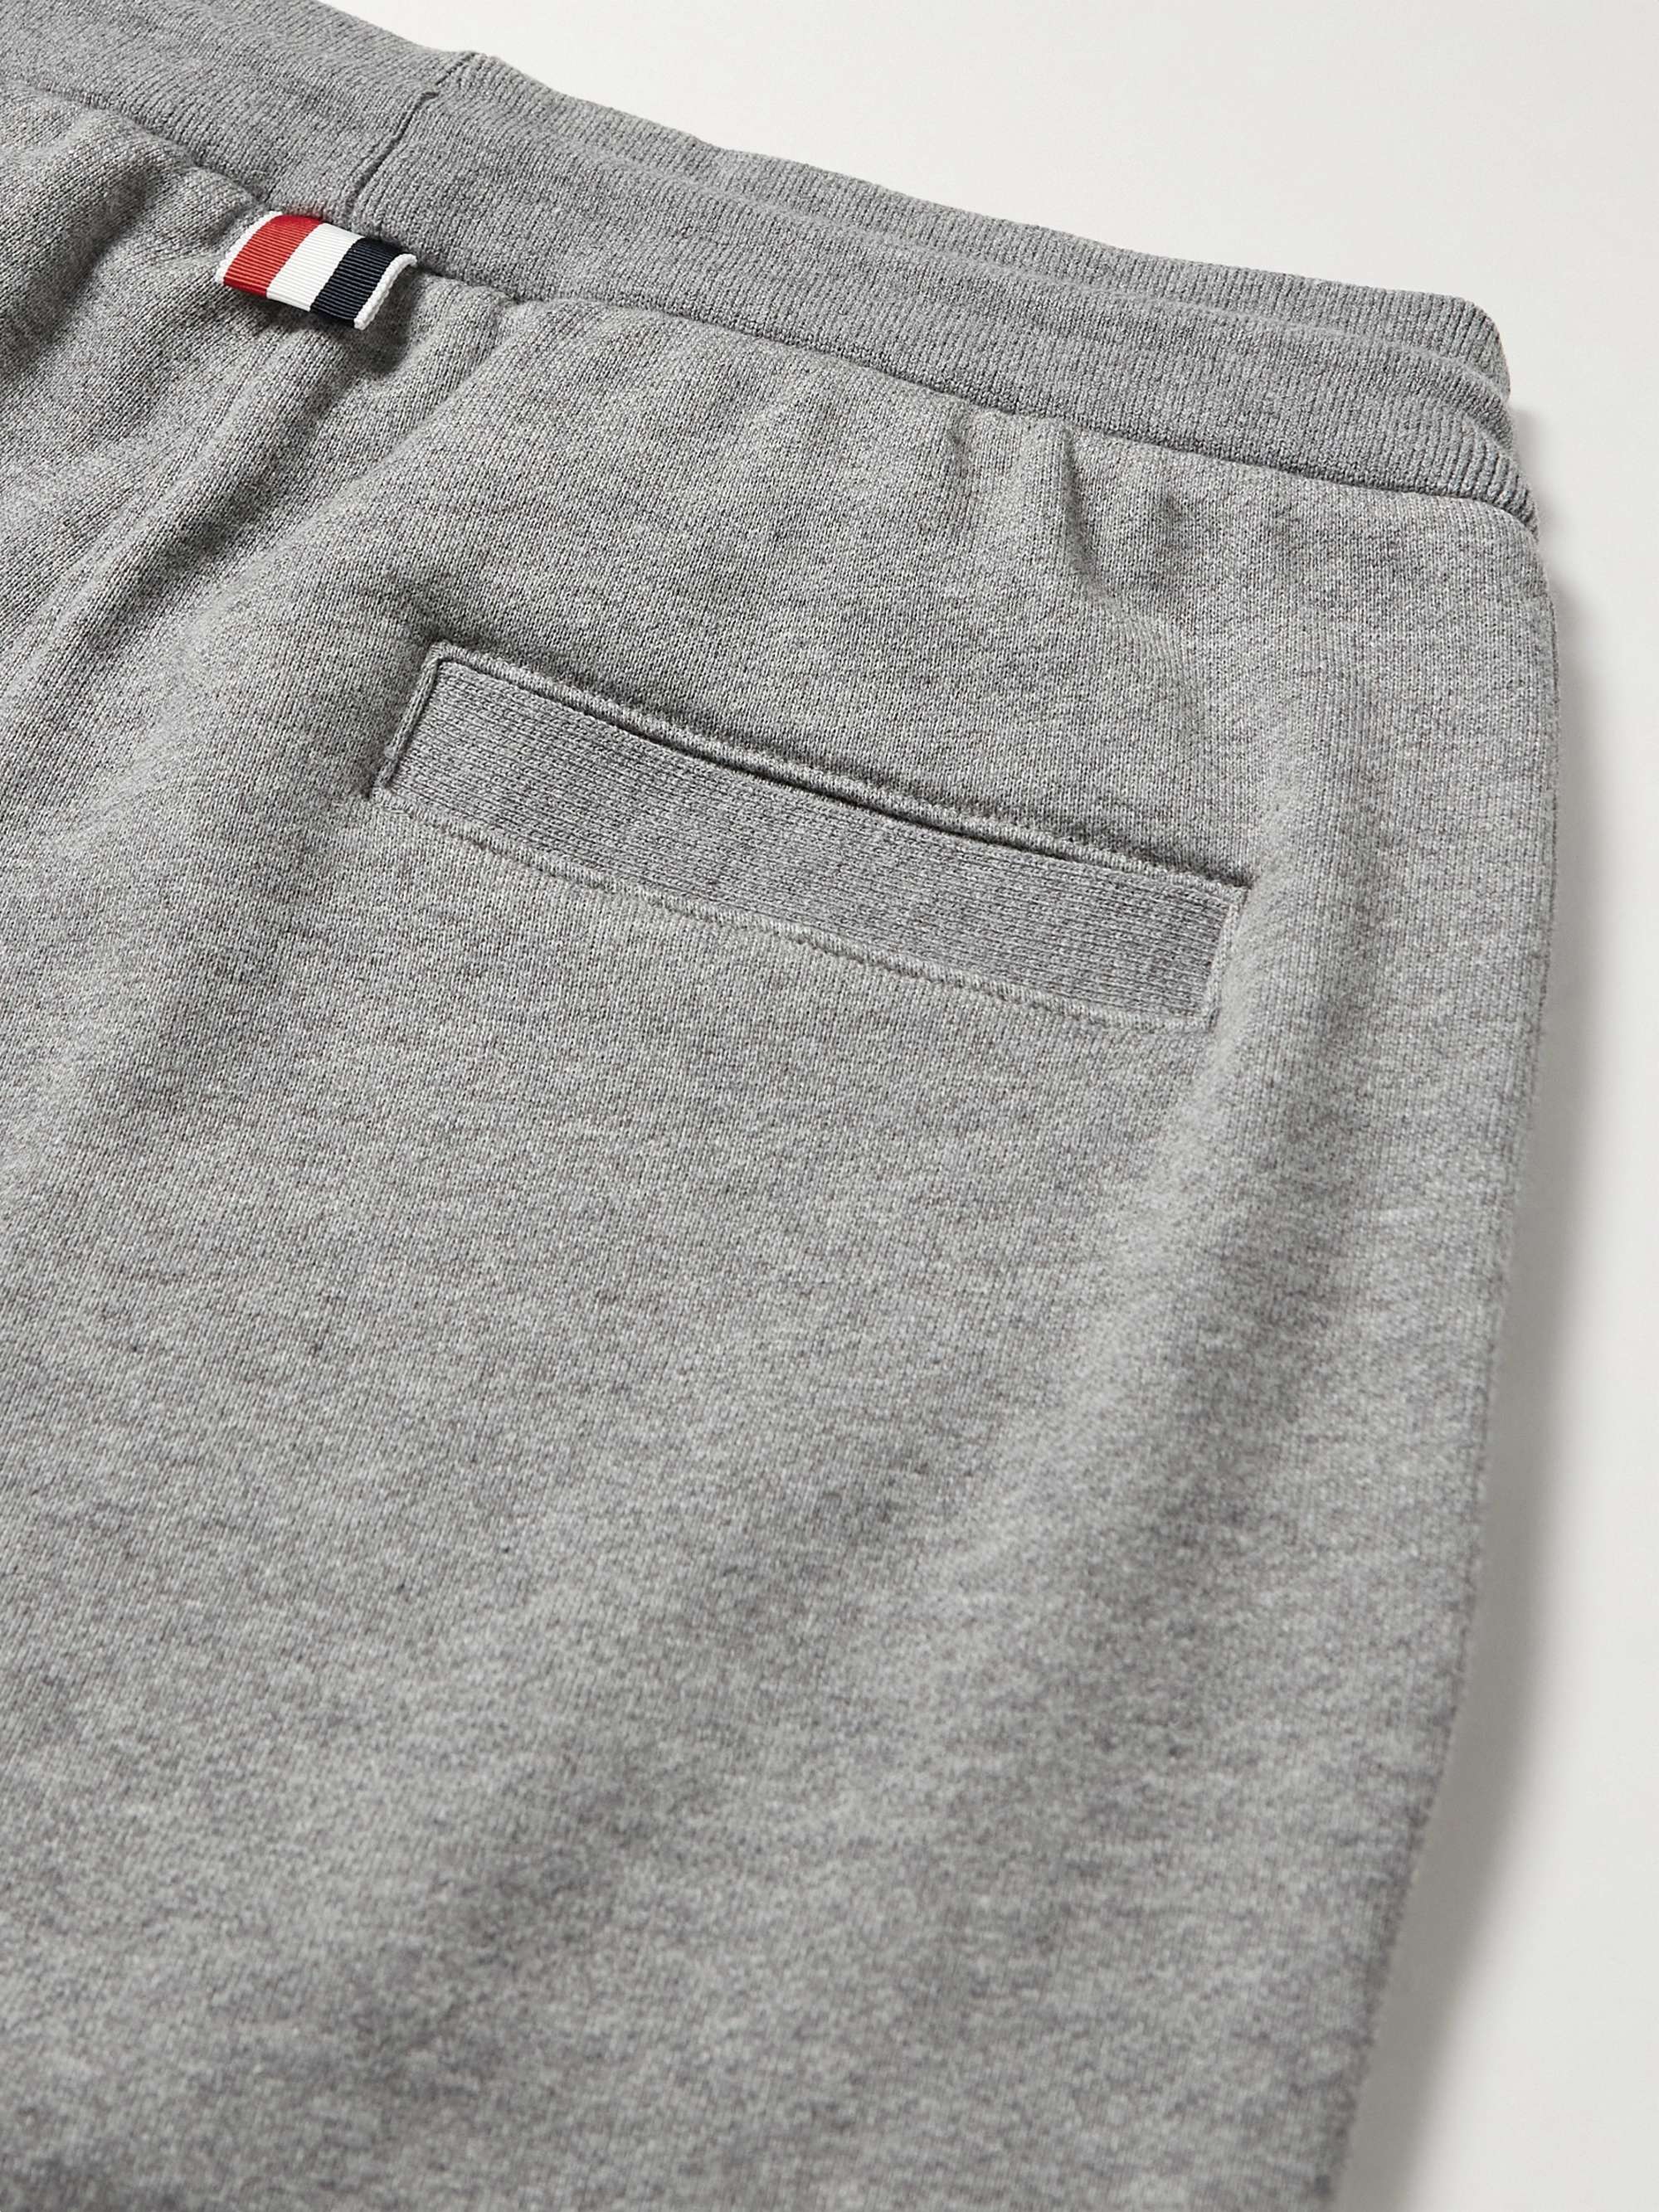 THOM BROWNE Tapered Striped Cotton-Jersey Sweatpants